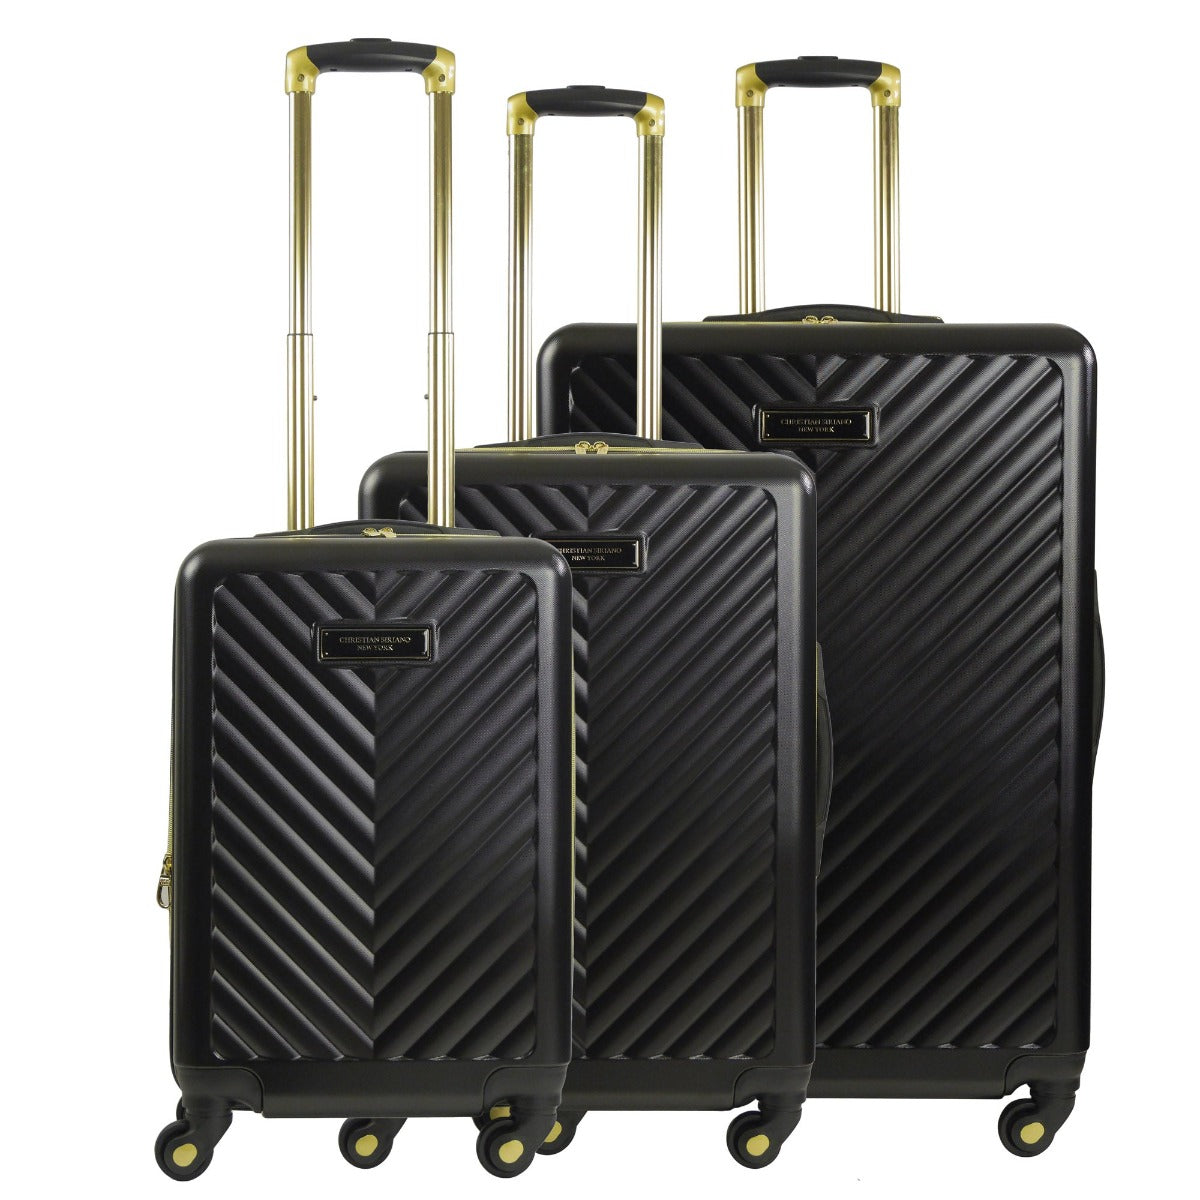 Christian Siriano Addie 3 piece suitcase set black - best luggage sets for travelling